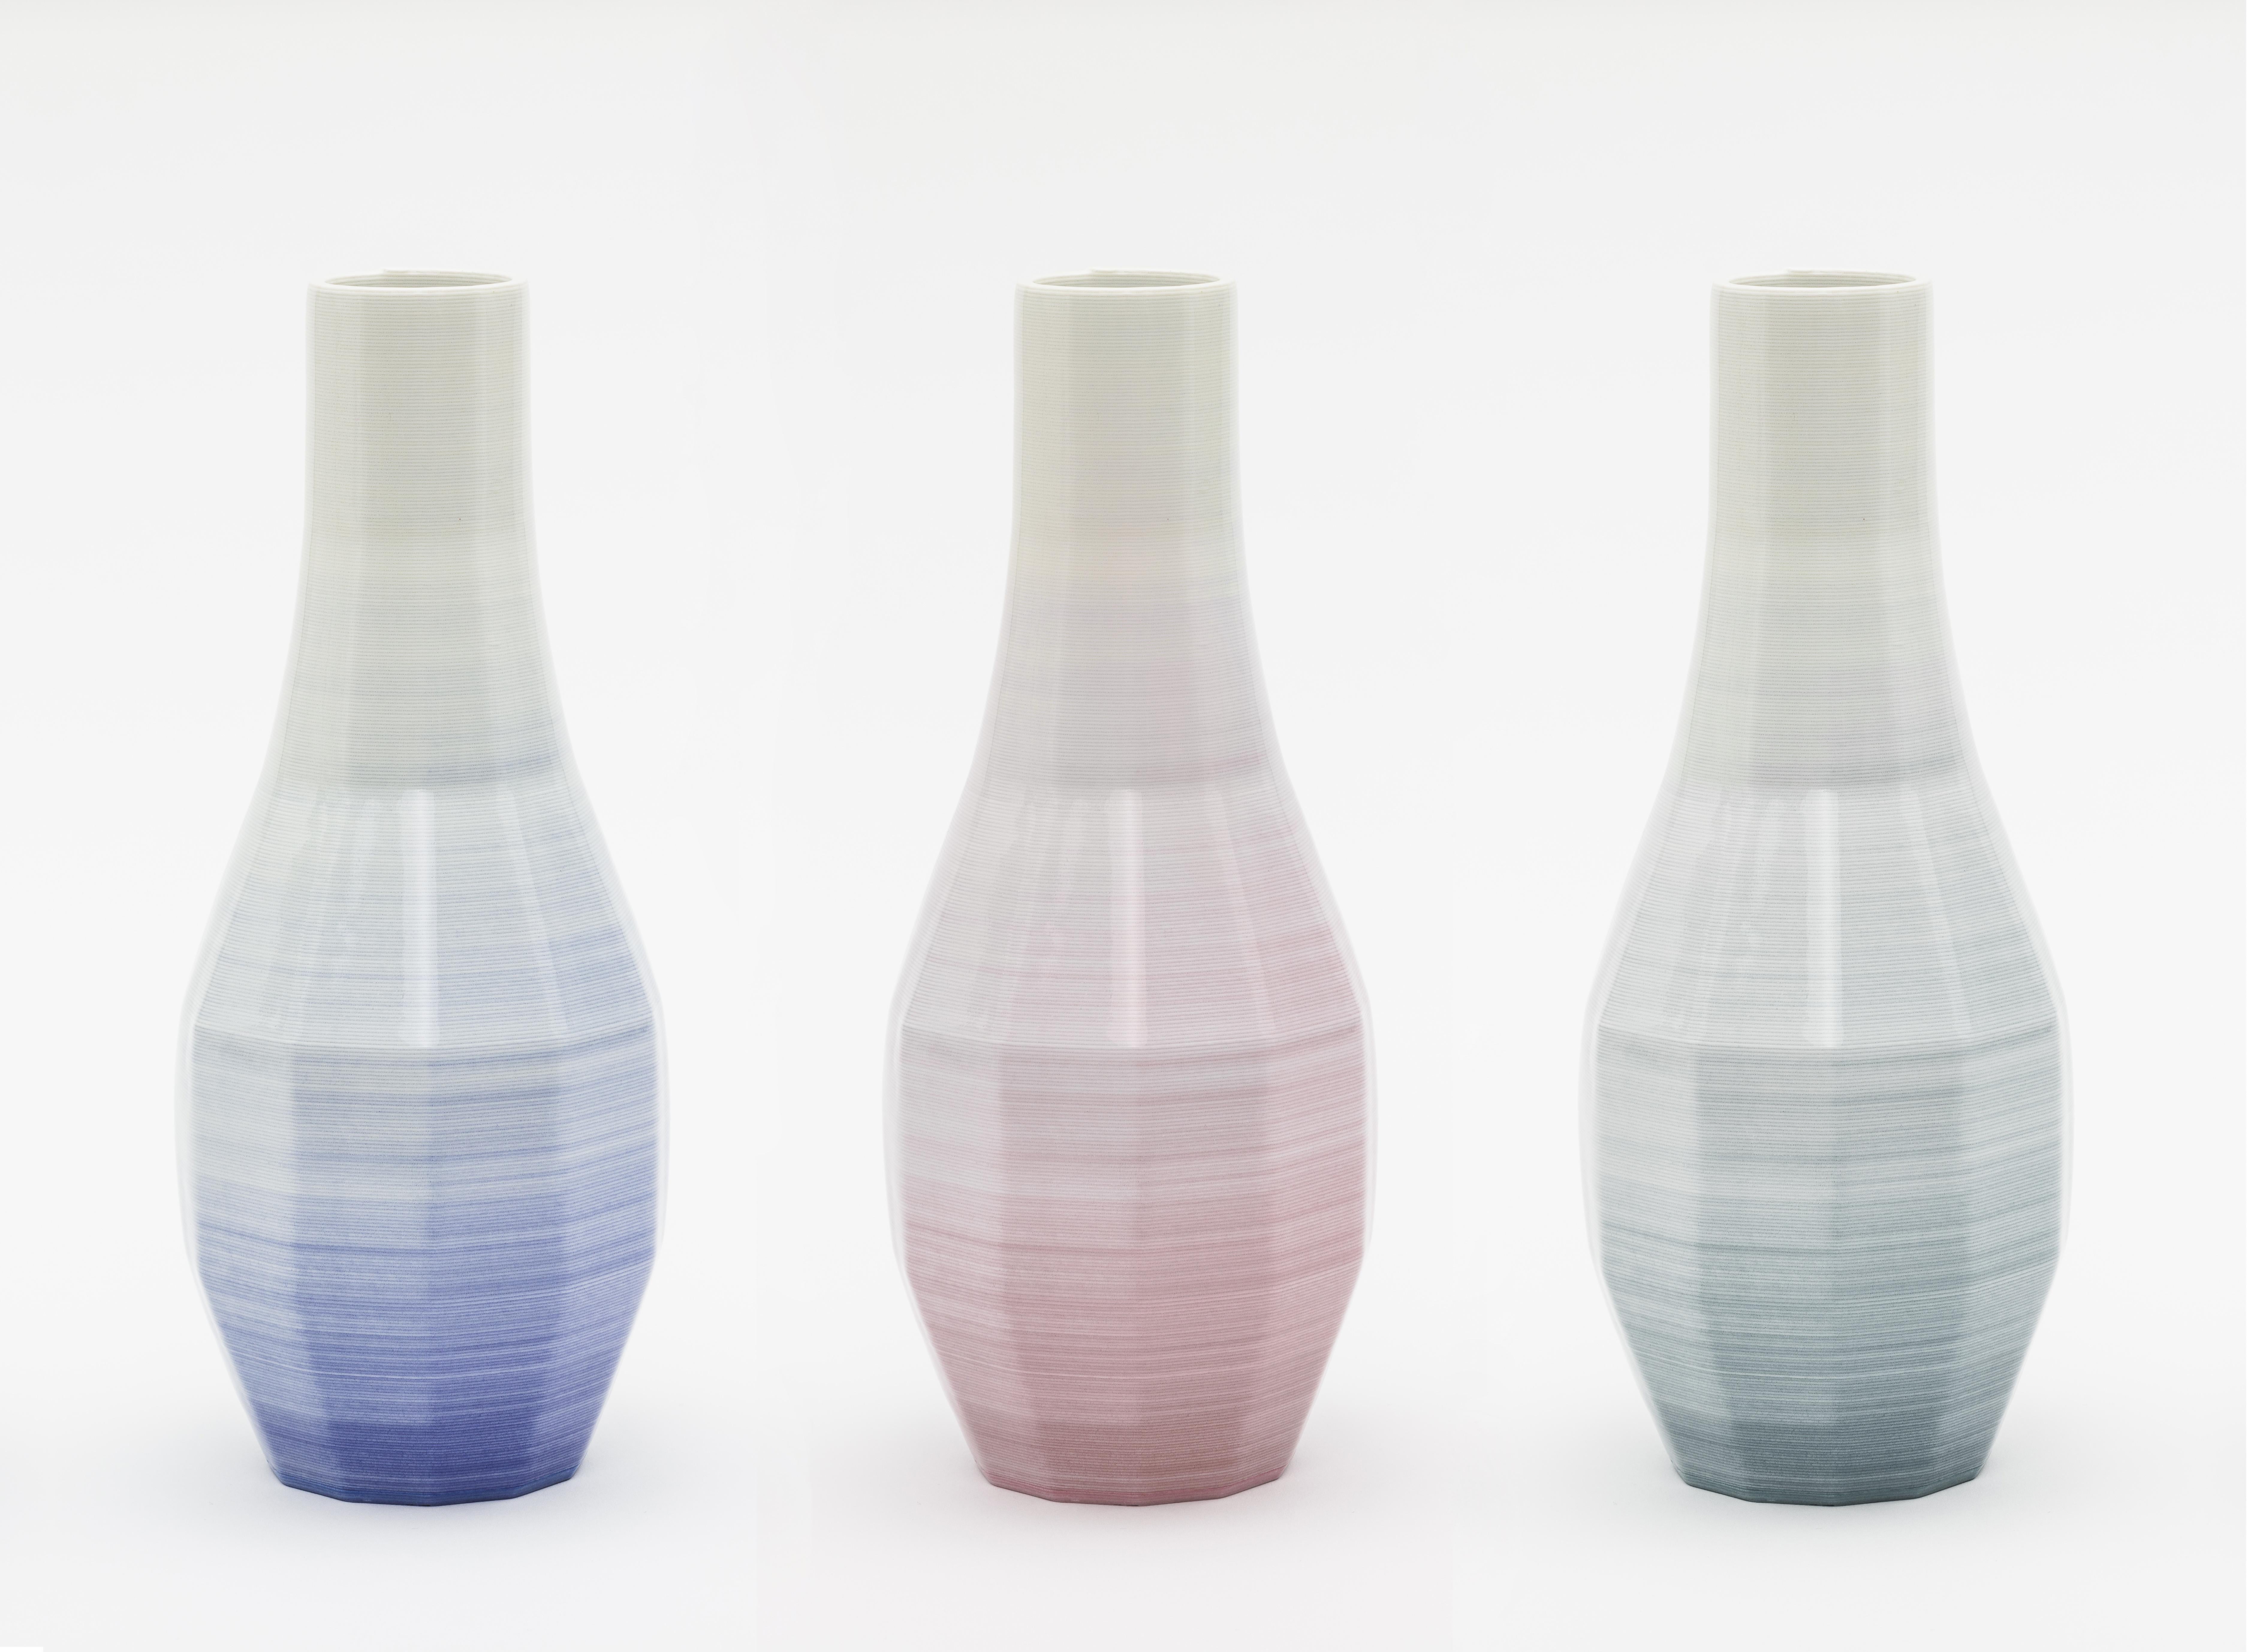 Set of 3 small porcelain Gradient vase by Philipp Aduatz
Limited Edition of 100
Dimensions: 11 x 11 x 26,5 cm
Materials: 3D printed porcelain

The inspiration and tool for the design of the Gradient vase was subdivision modelling, a computer